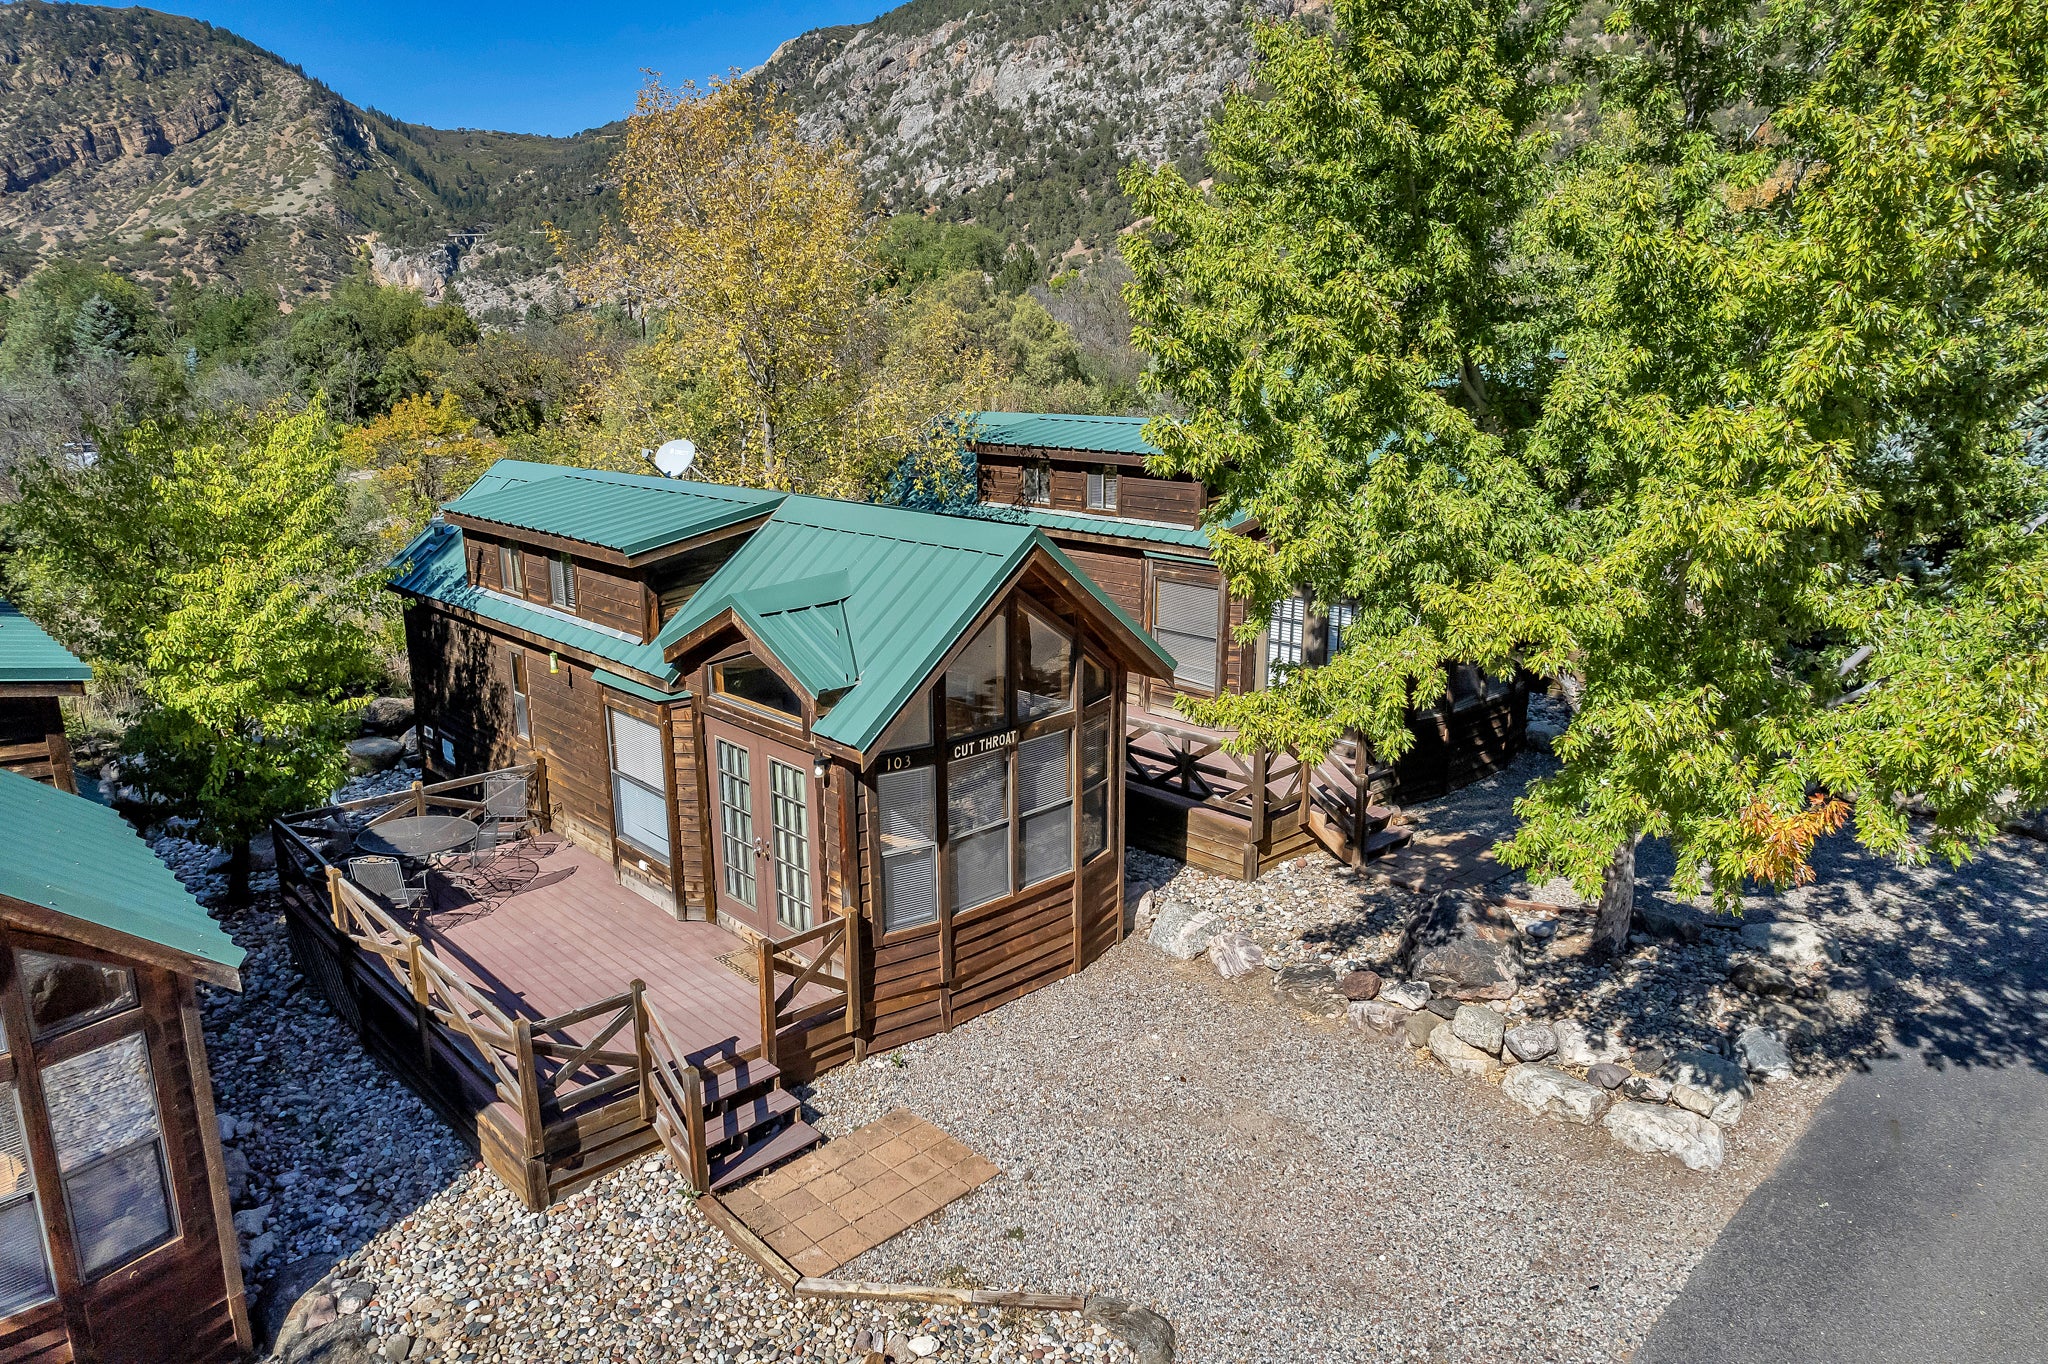 Camper submitted image from Glenwood Canyon Resort - 1